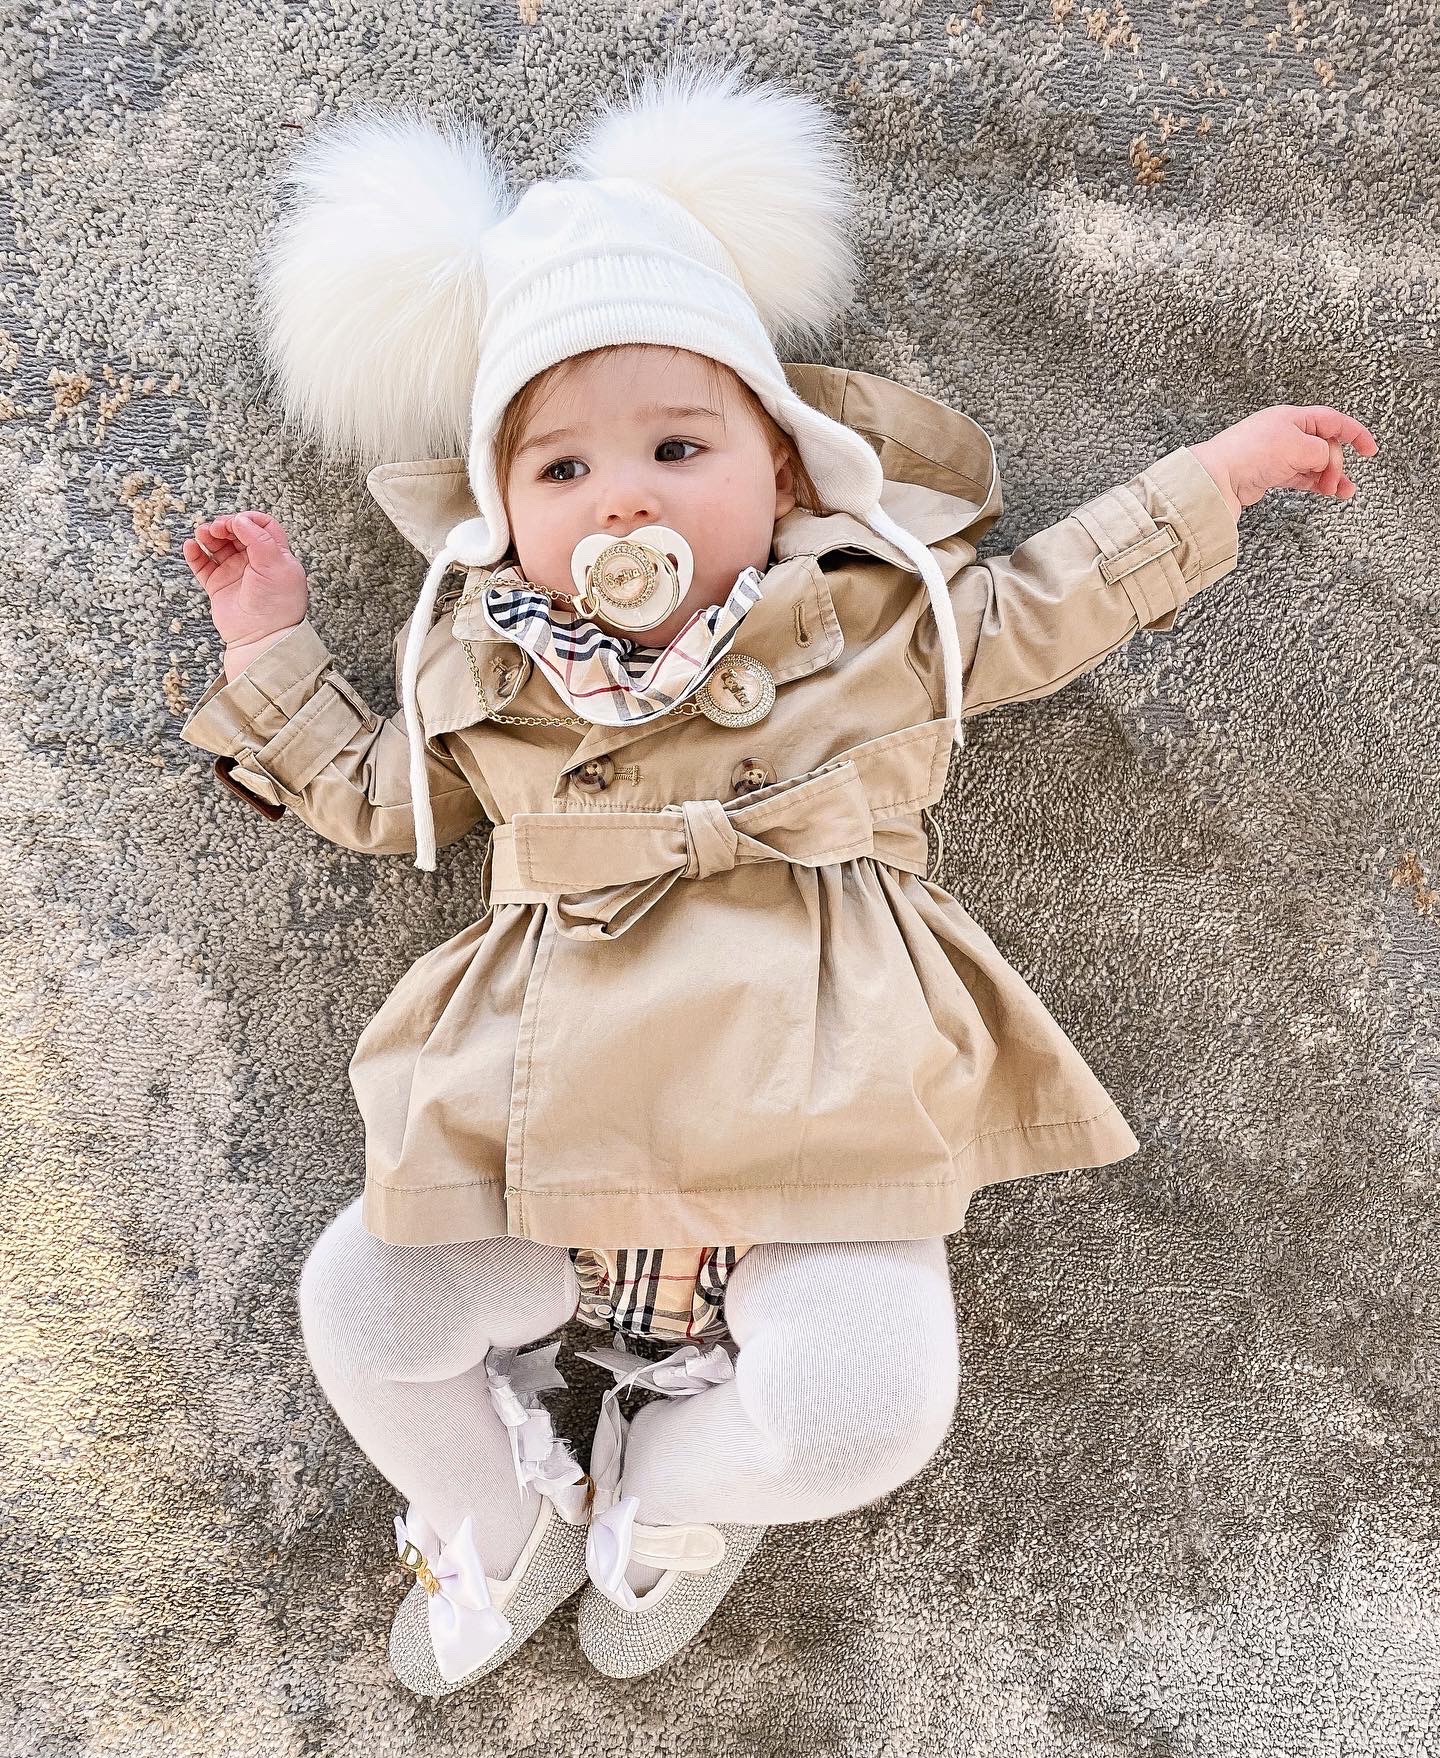 Instagram Recap by popular US fashion blog, The Sweetest Thing: image of a baby wearing a Ralph Lauren trench coat, Etsy Minilittlebaby Gold Pleated Personalised DUMMY AND Chain pacifier, Etsy Minilittlebaby Pacifier Clip, Etsy Minilittlebaby personalized Pearl Baby Girl shoes, and Gap Toddler Cable-Knit Pom Beanie.